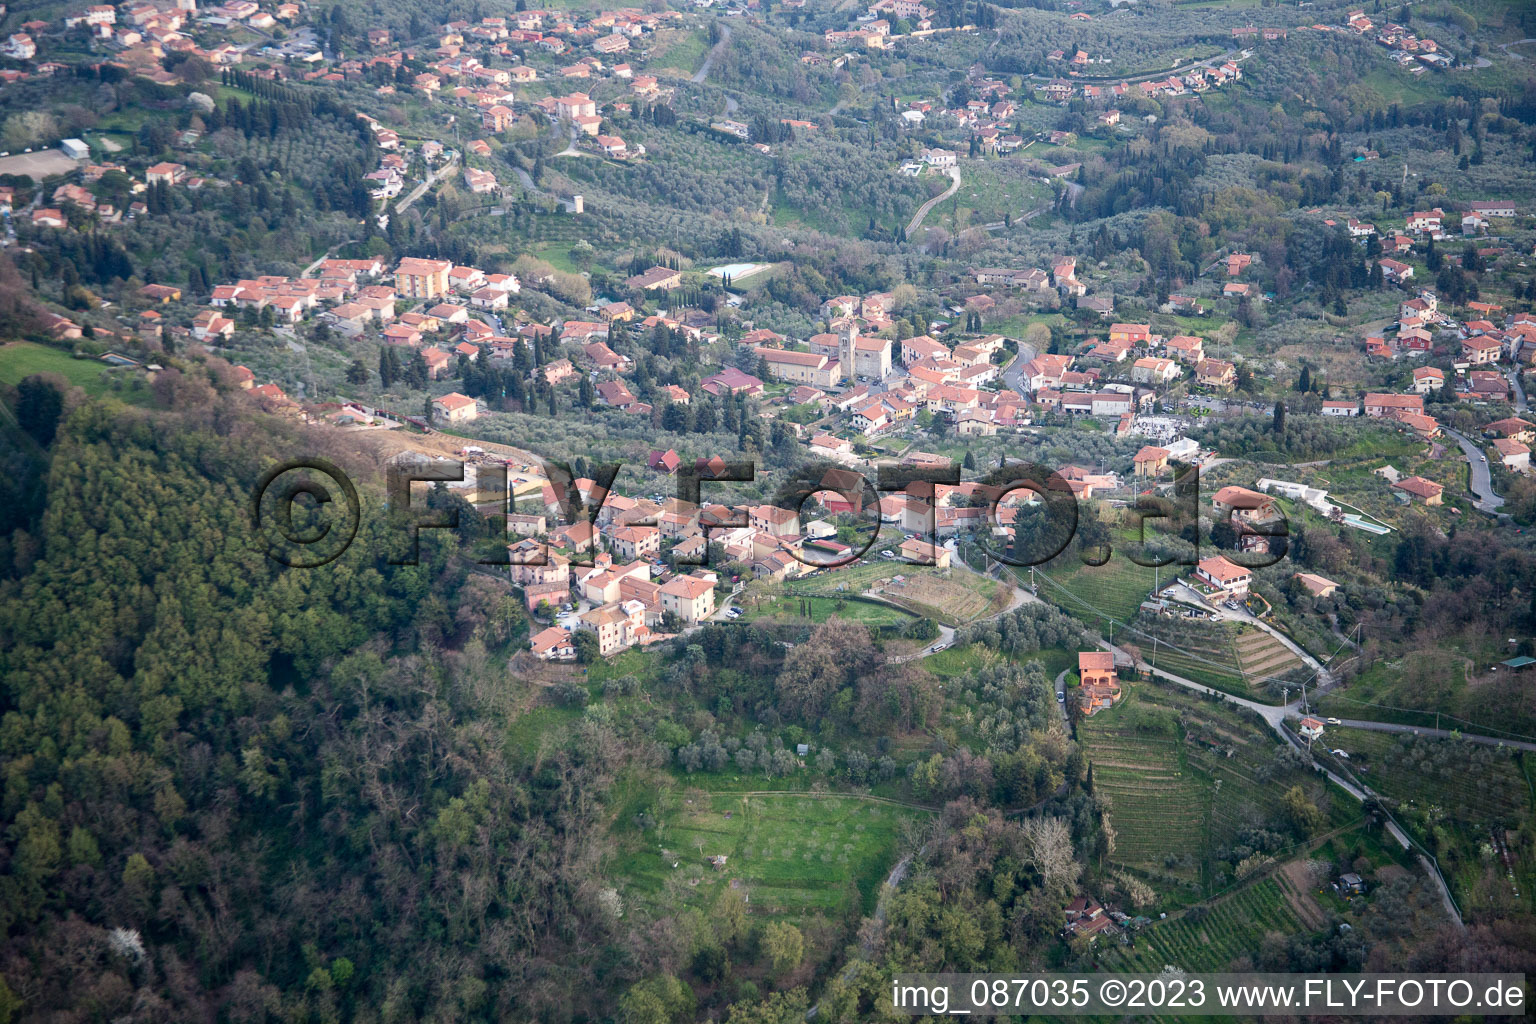 Pedona in the state Tuscany, Italy seen from above